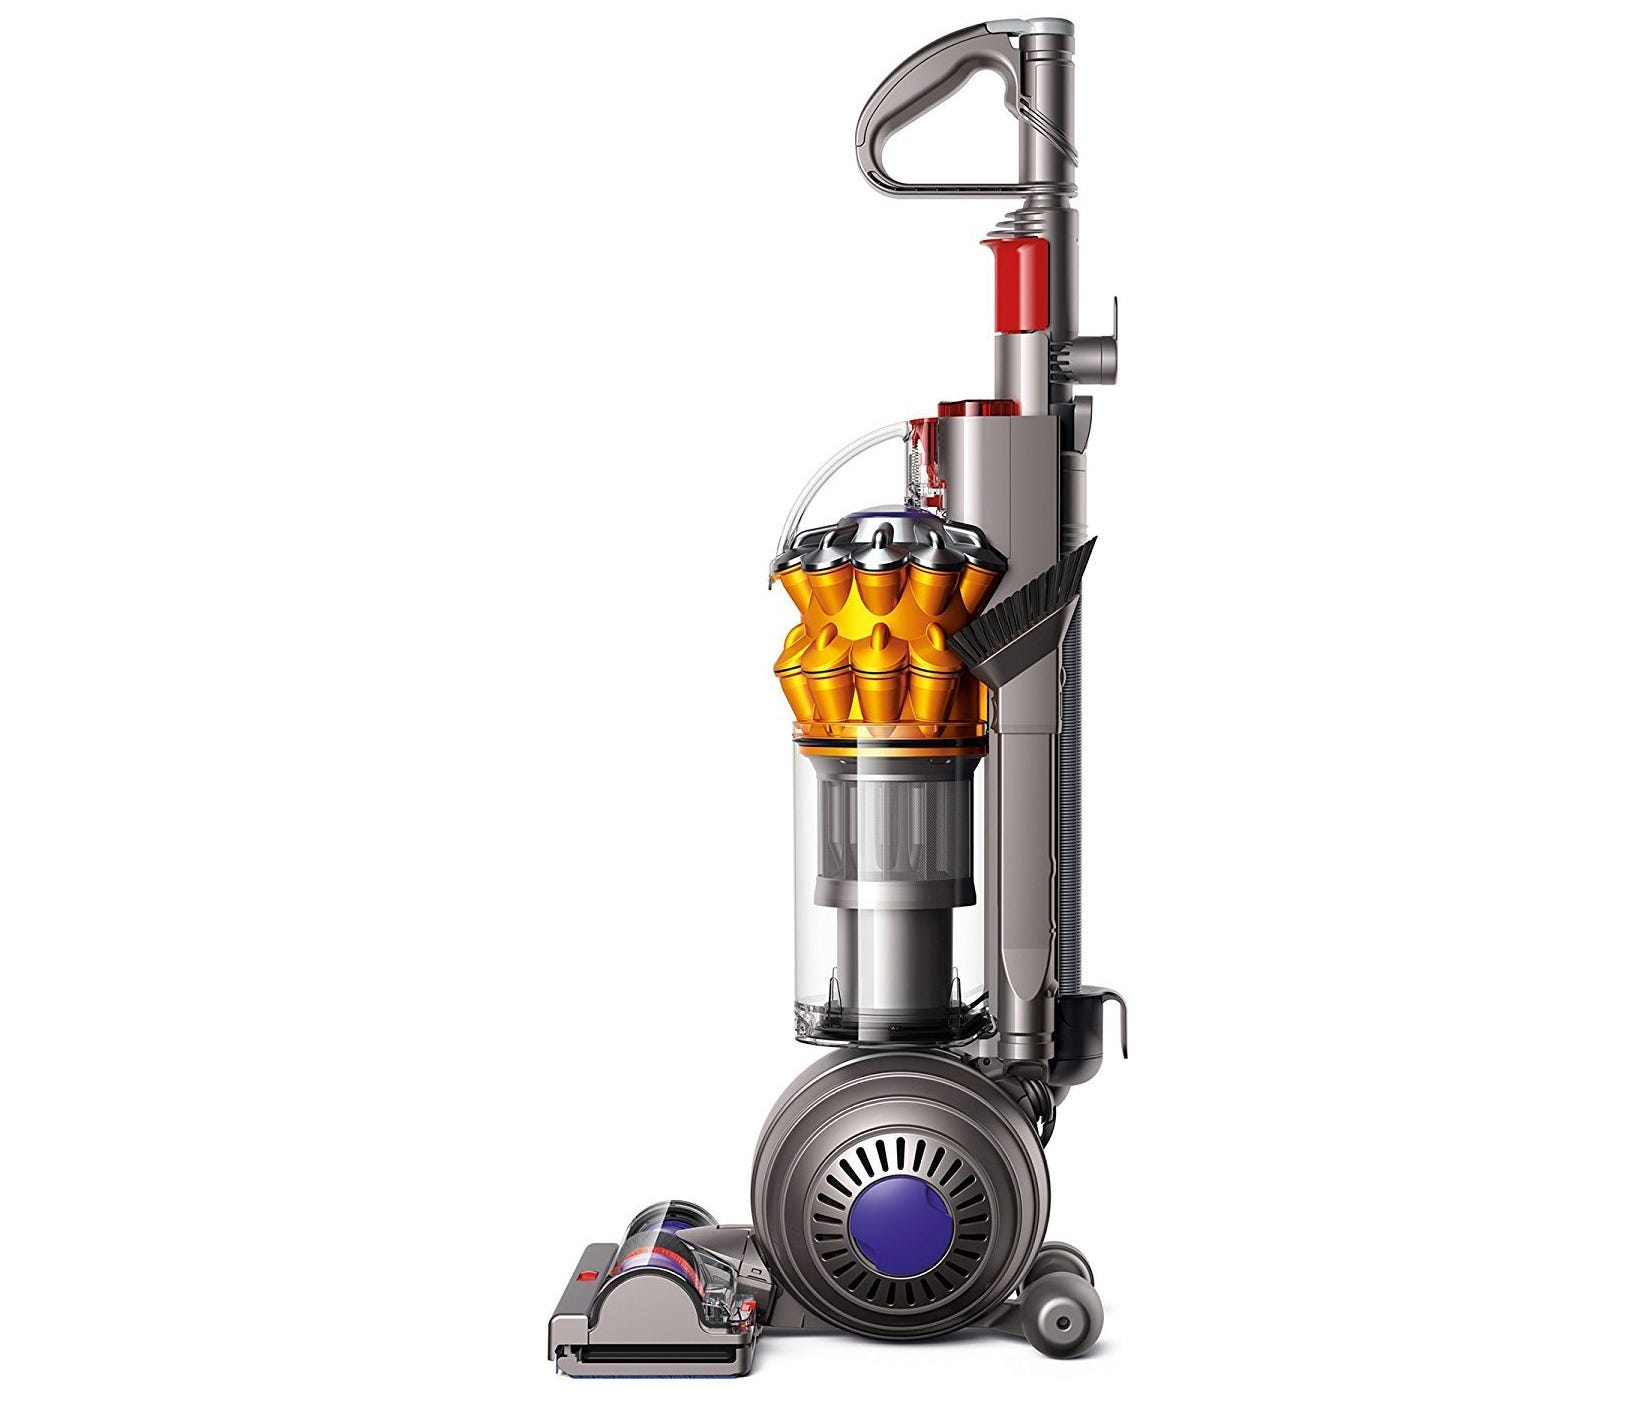 This lightweight Dyson vacuum is finally on sale for the perfect low price